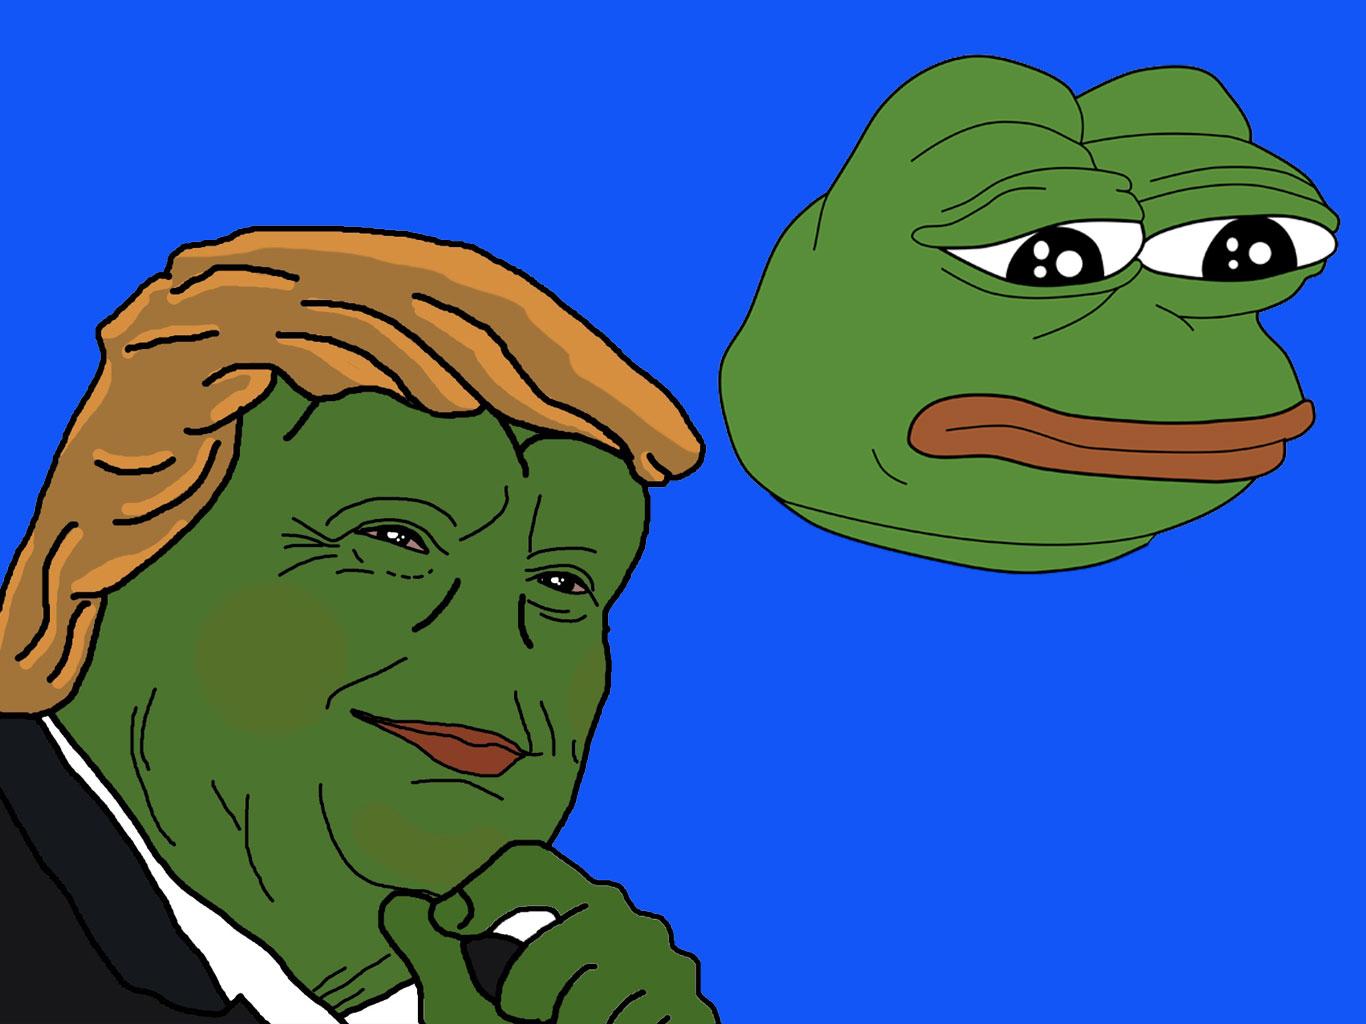  Pepe  the Frog  meme designated hate symbol by the Anti 